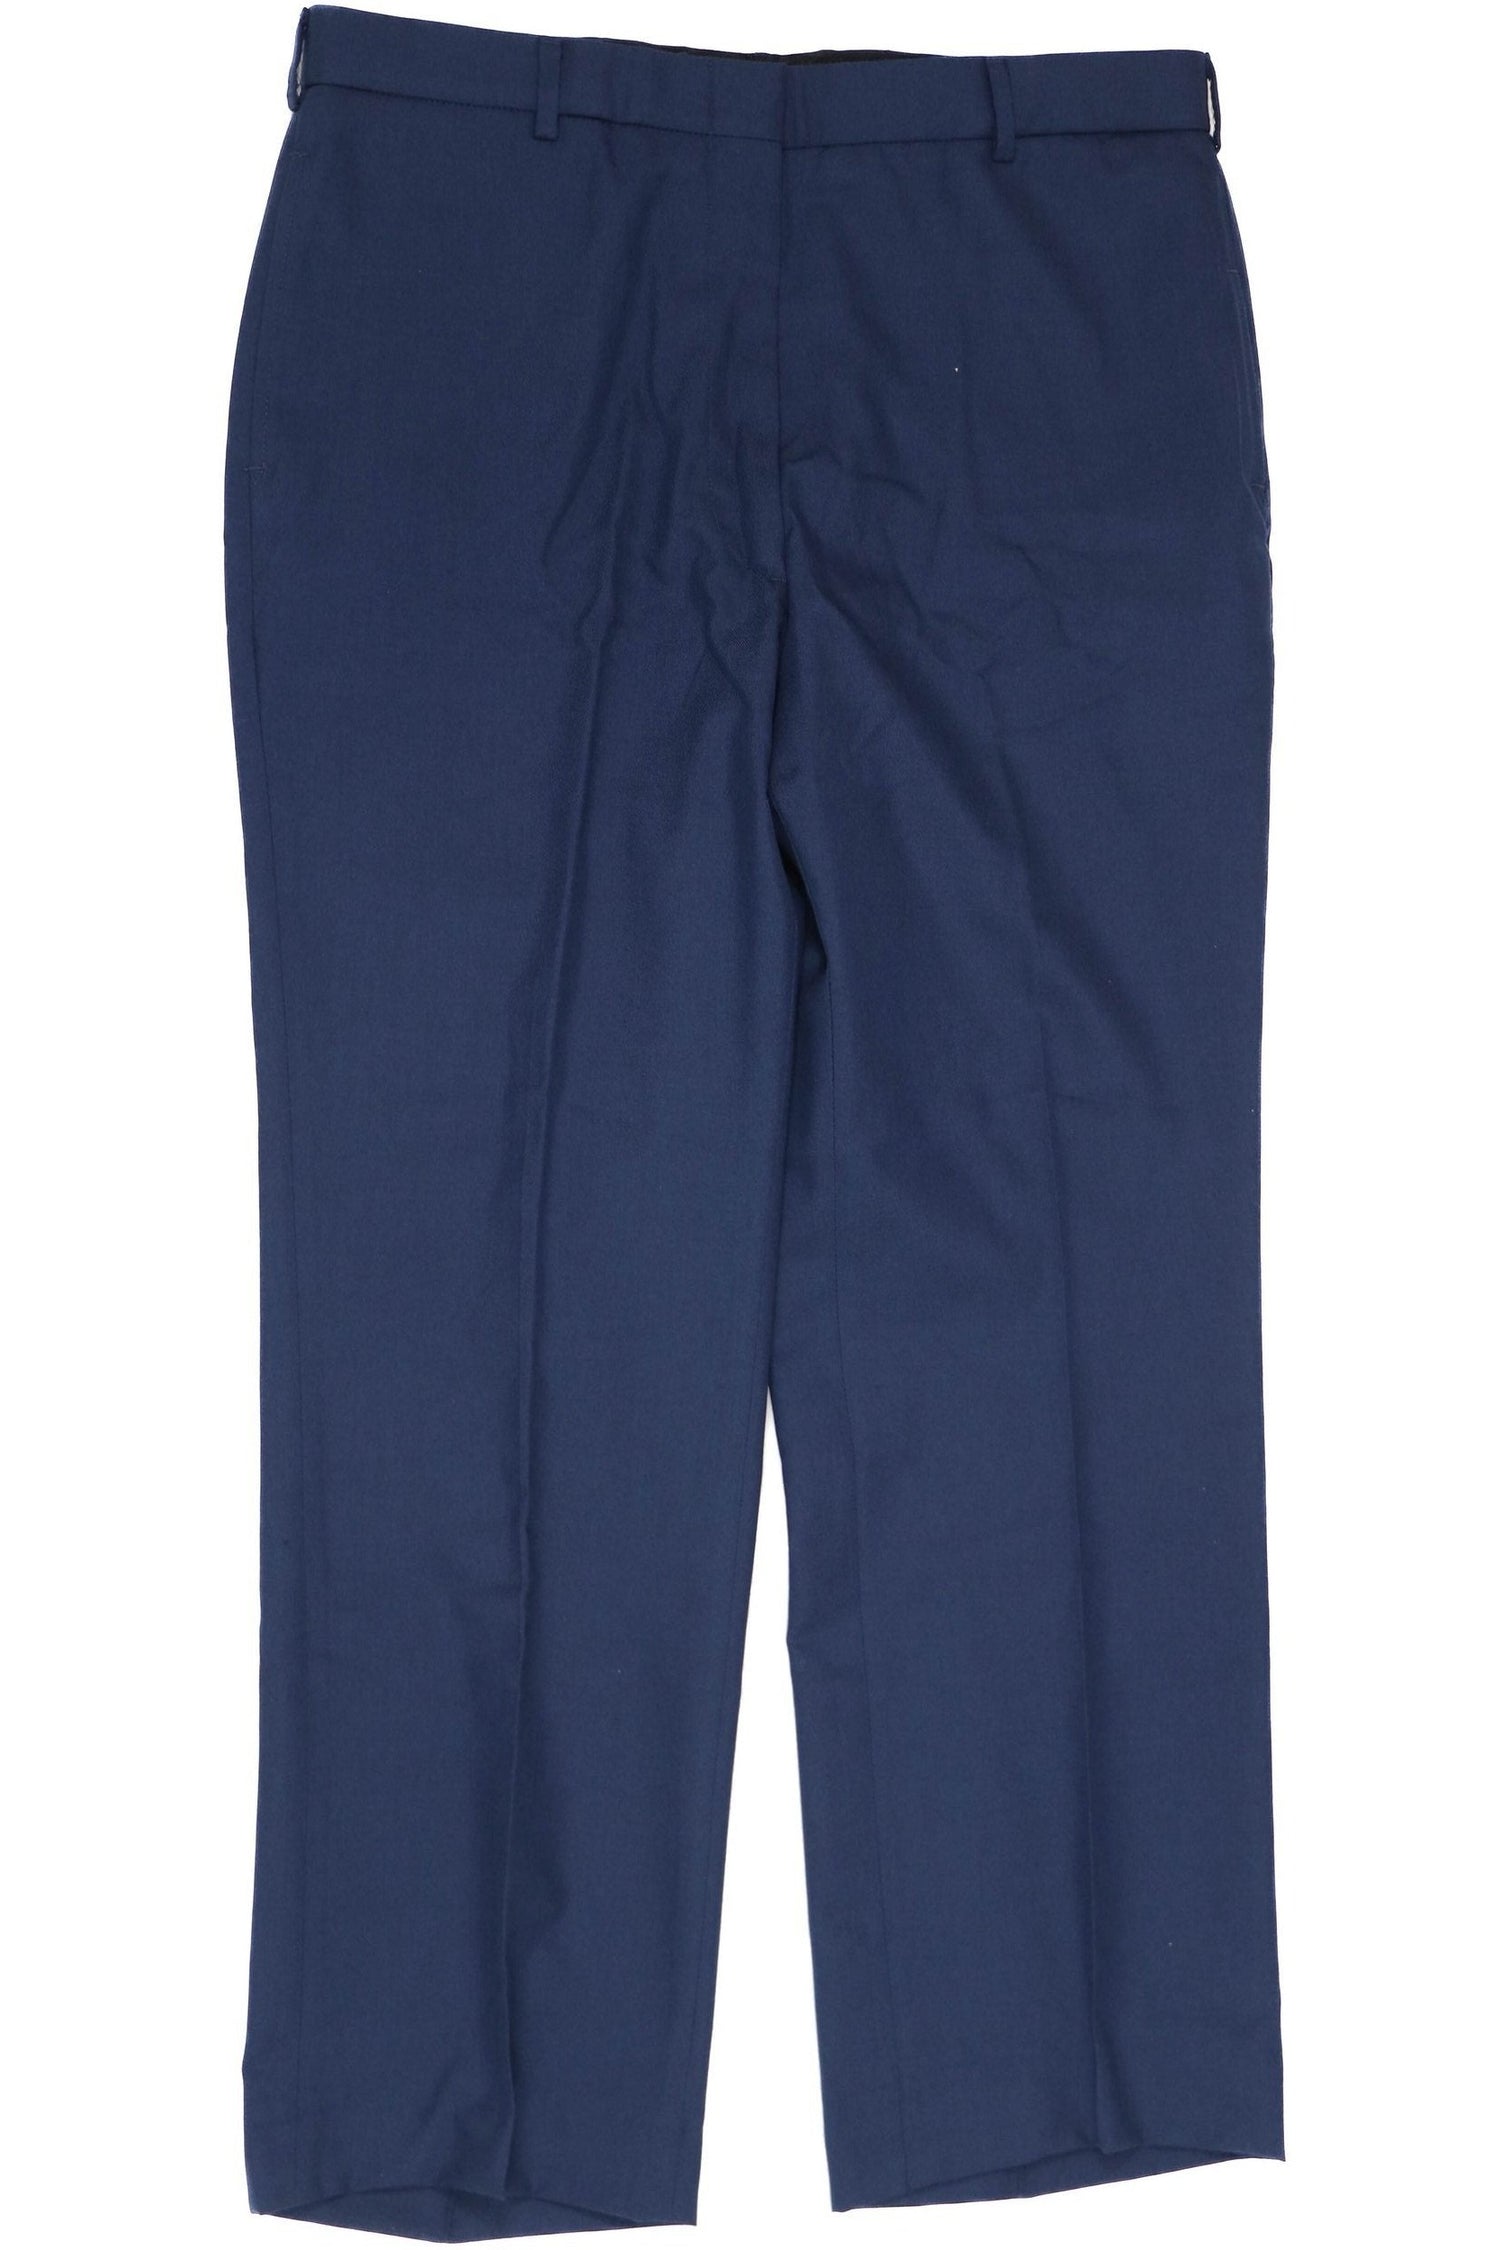 USAF Men's Service Trousers